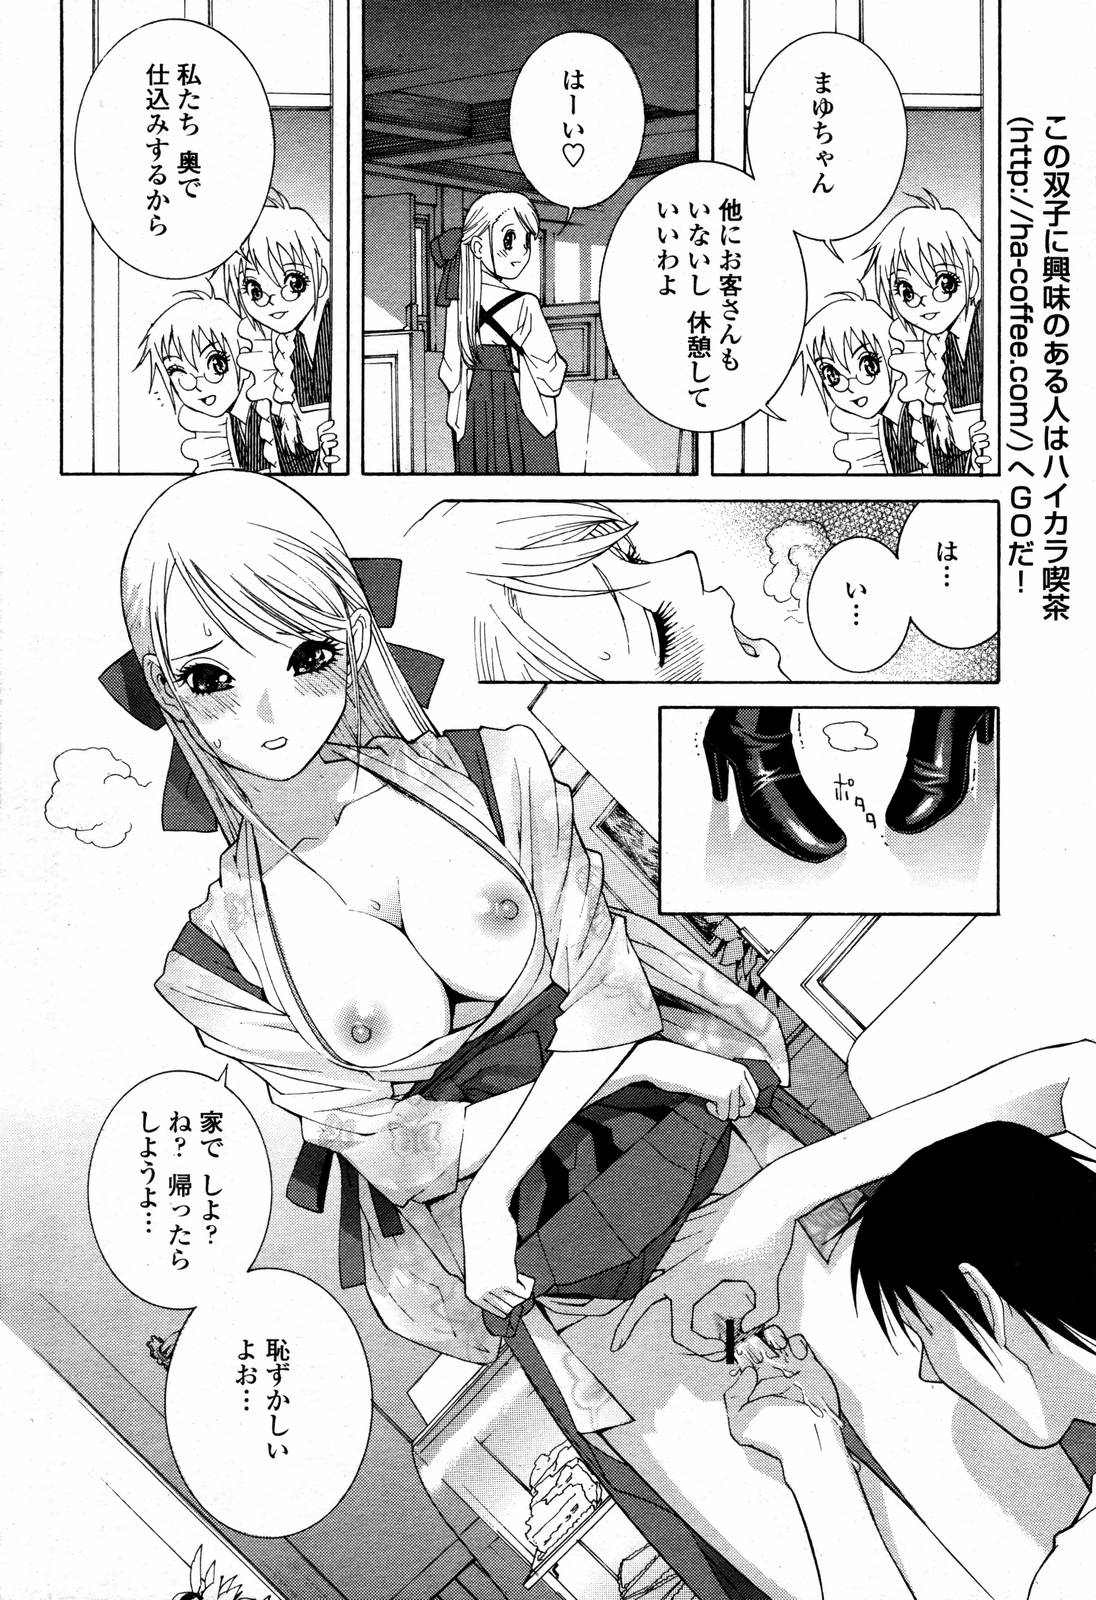 COMIC Momohime 2006-09 page 36 full